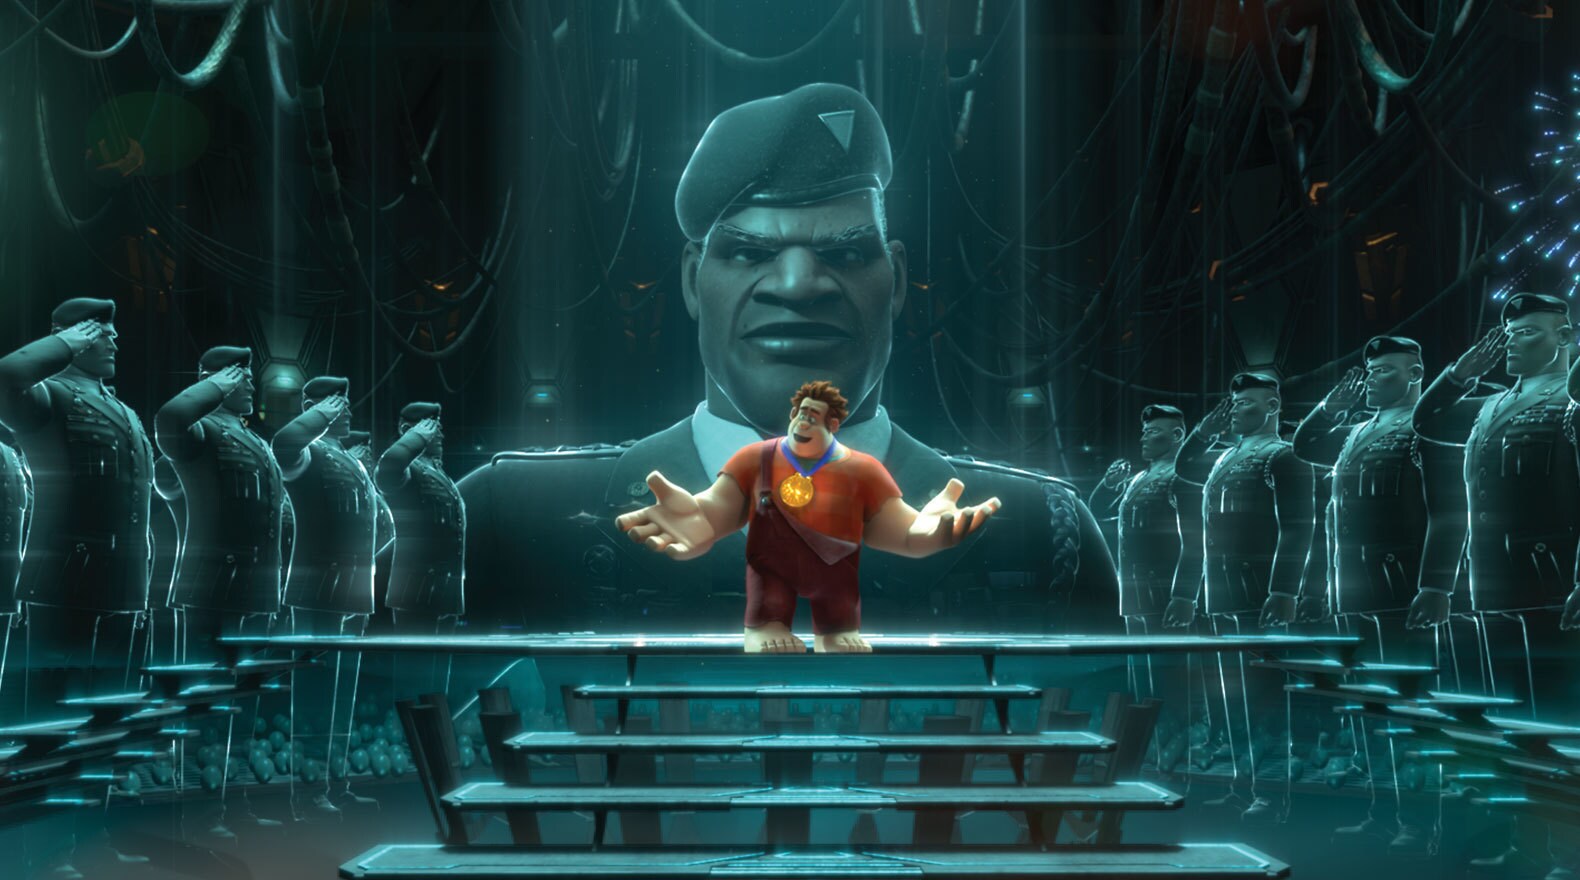 Ralph, played by John C. Riley, getting and accepting a medal in "Wreck-It Ralph" 